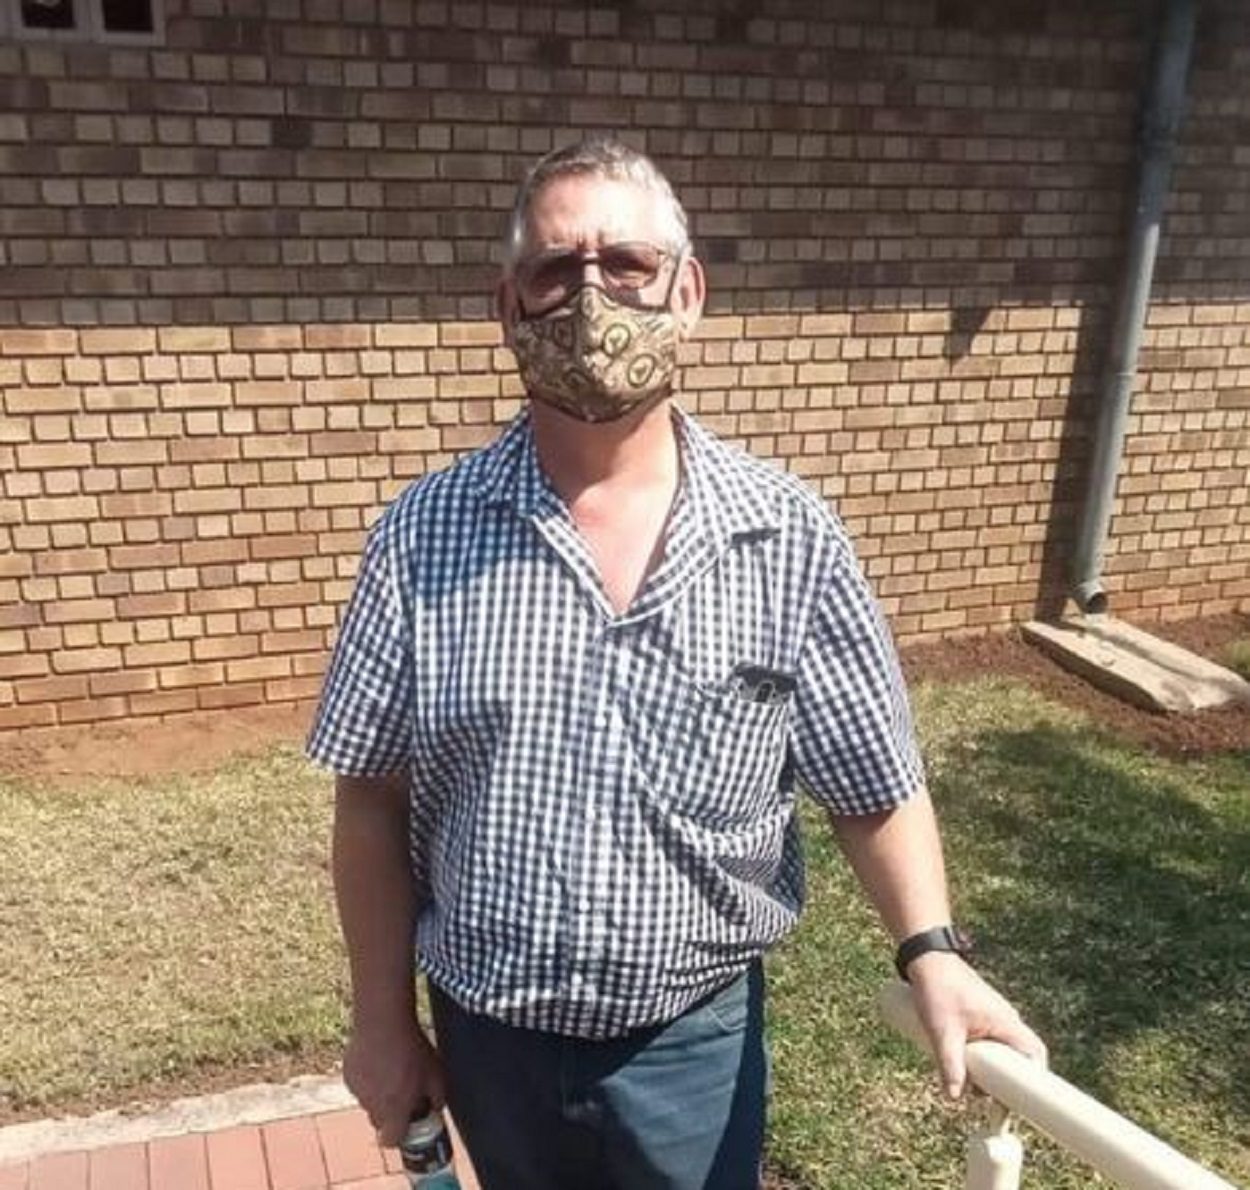 Man jailed for calling his colleagues ‘uneducated baboons’